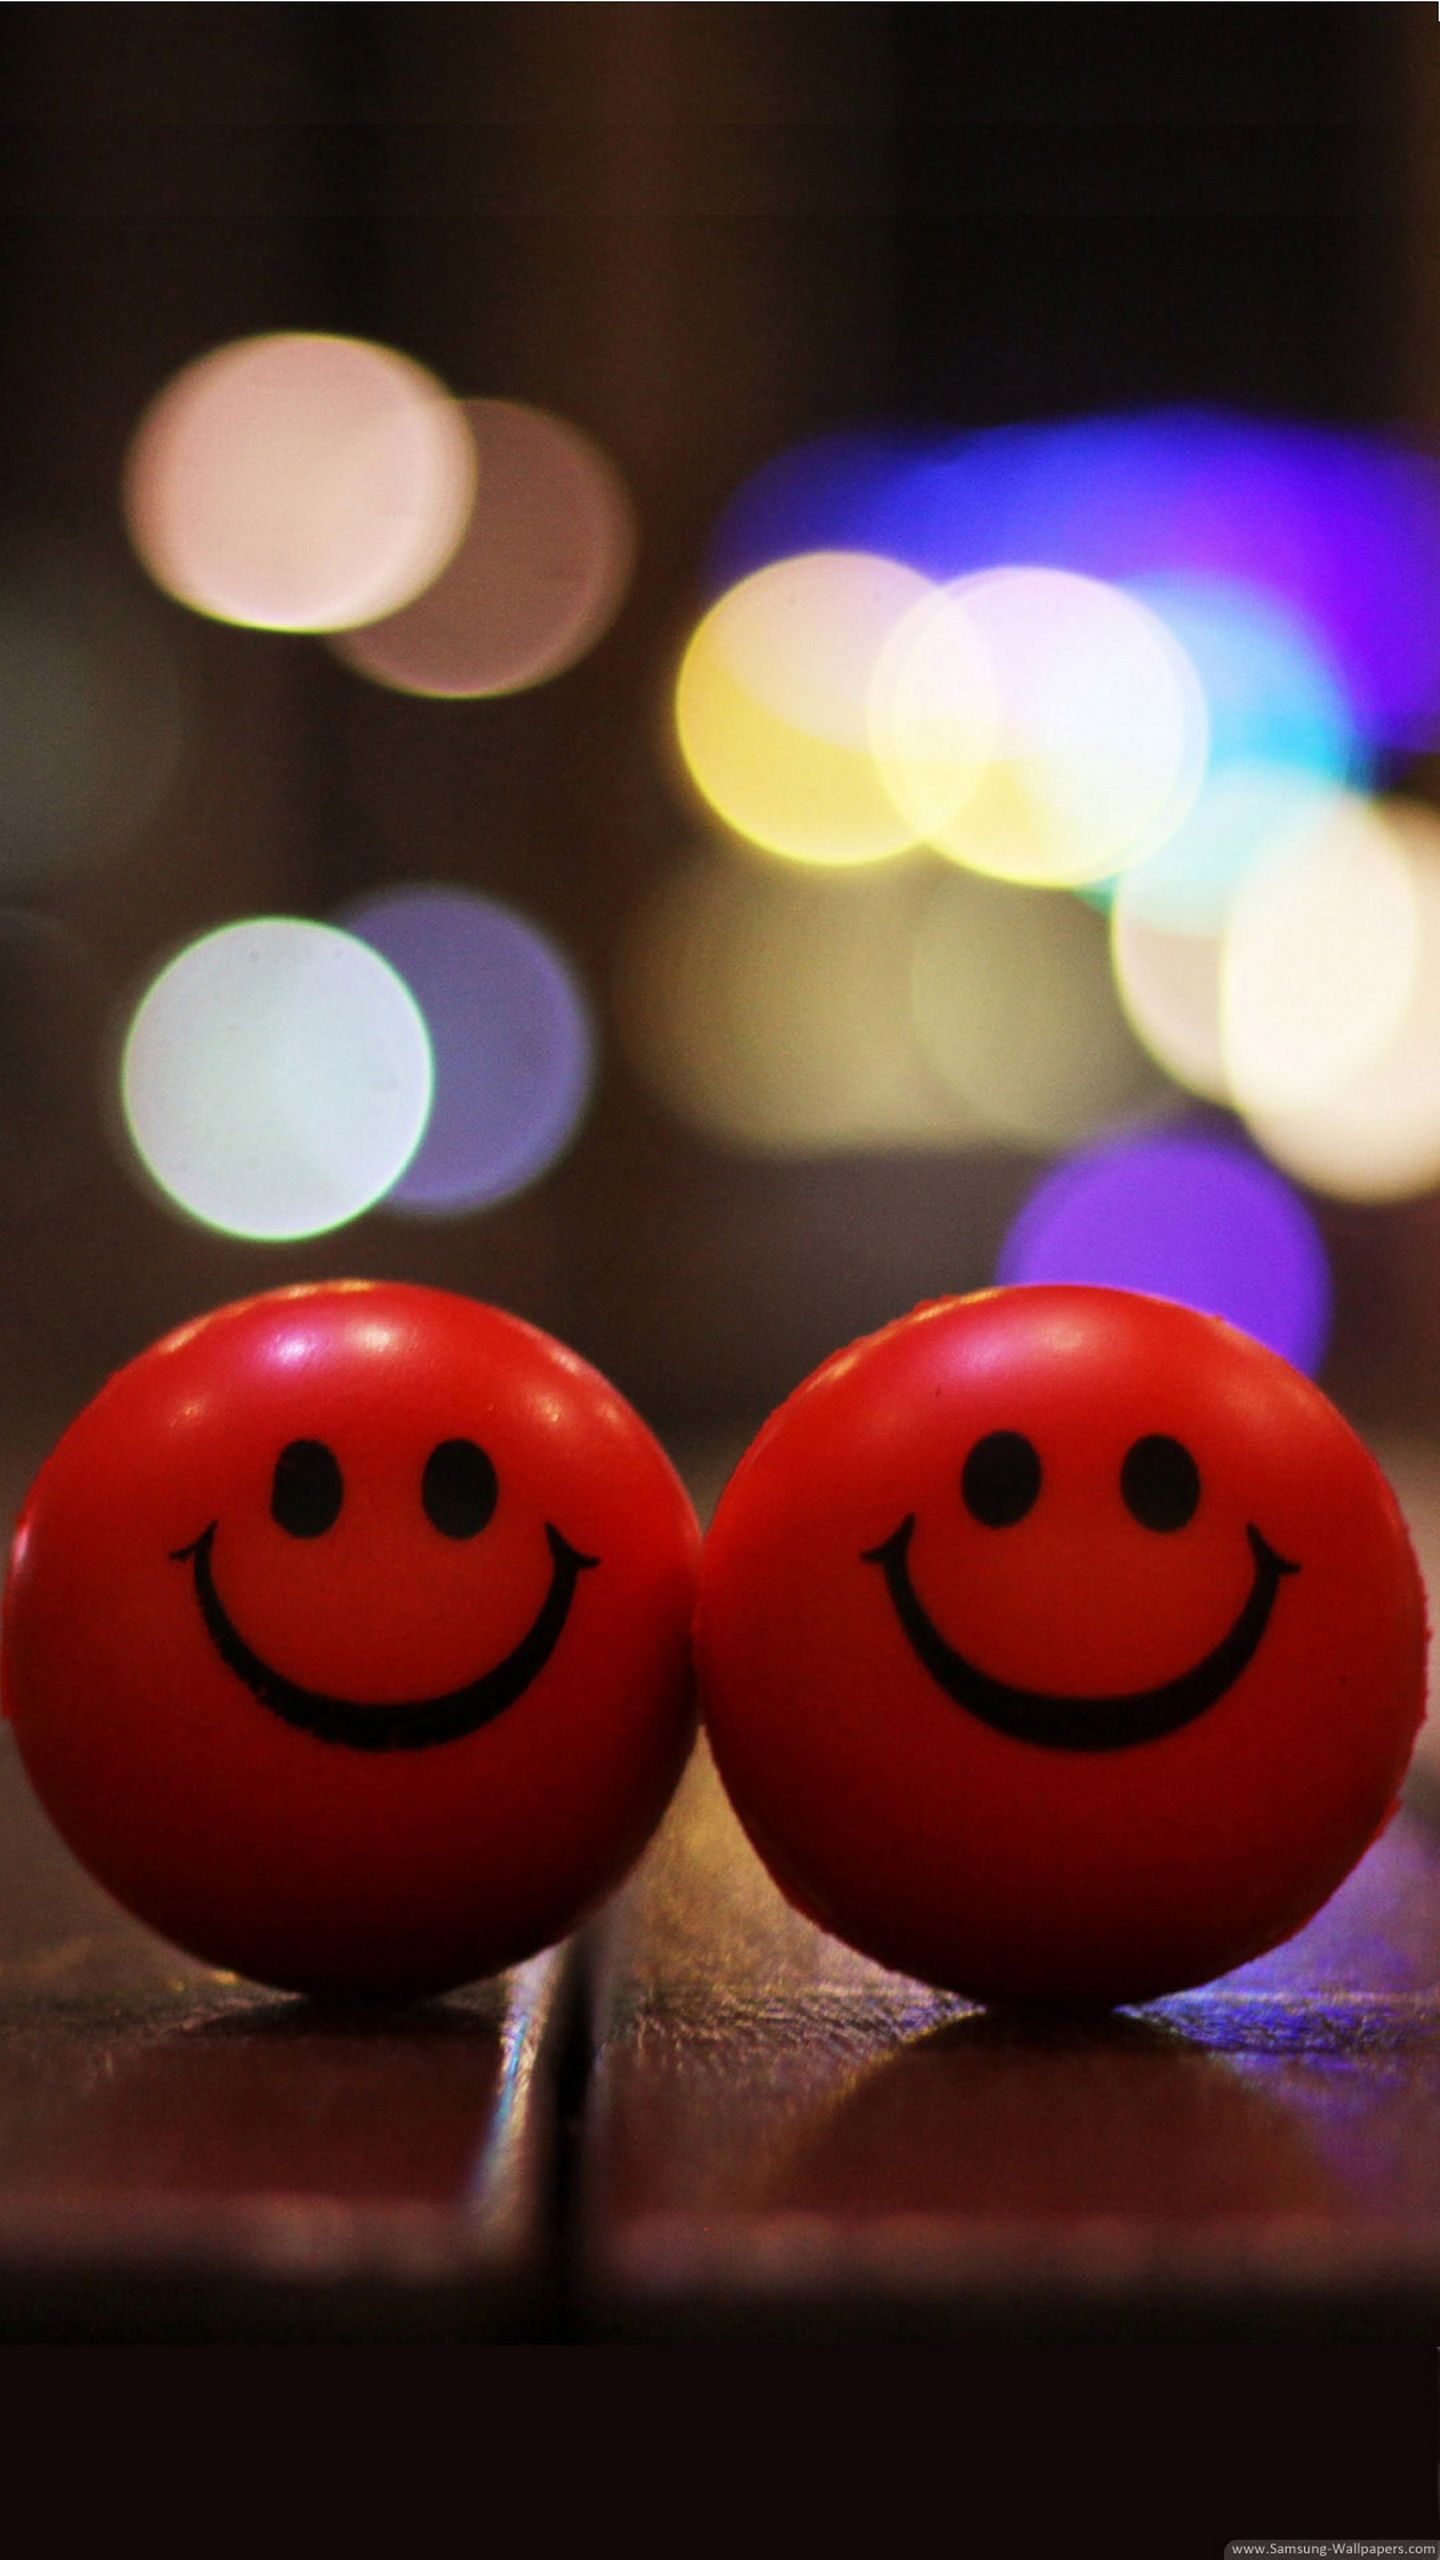 Two little red smiley balls Wallpaper Cute love wallpapers